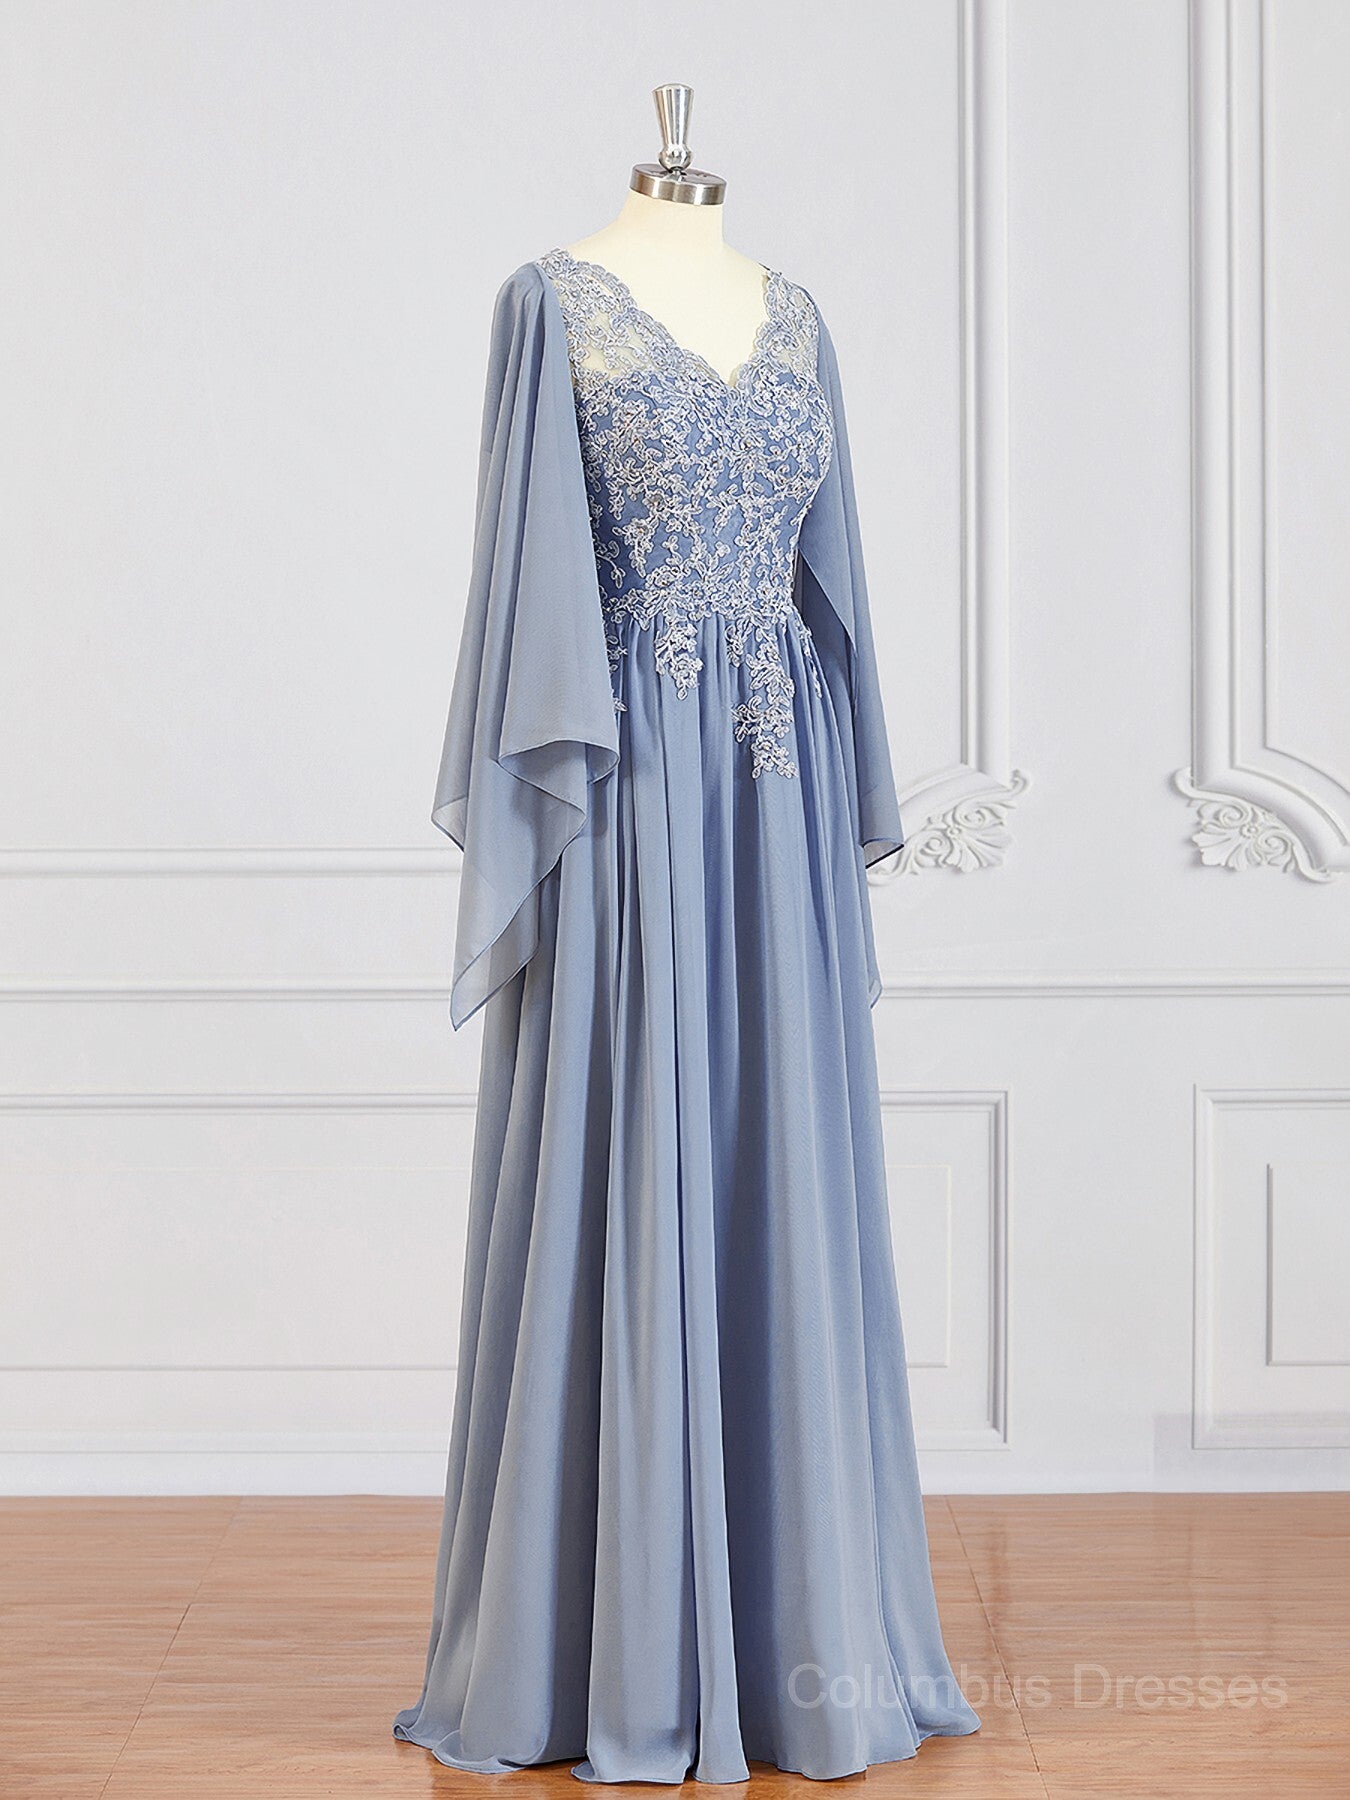 Bridesmaid Dresses Convertable, A-Line/Princess V-neck Floor-Length Chiffon Mother of the Bride Dresses With Appliques Lace